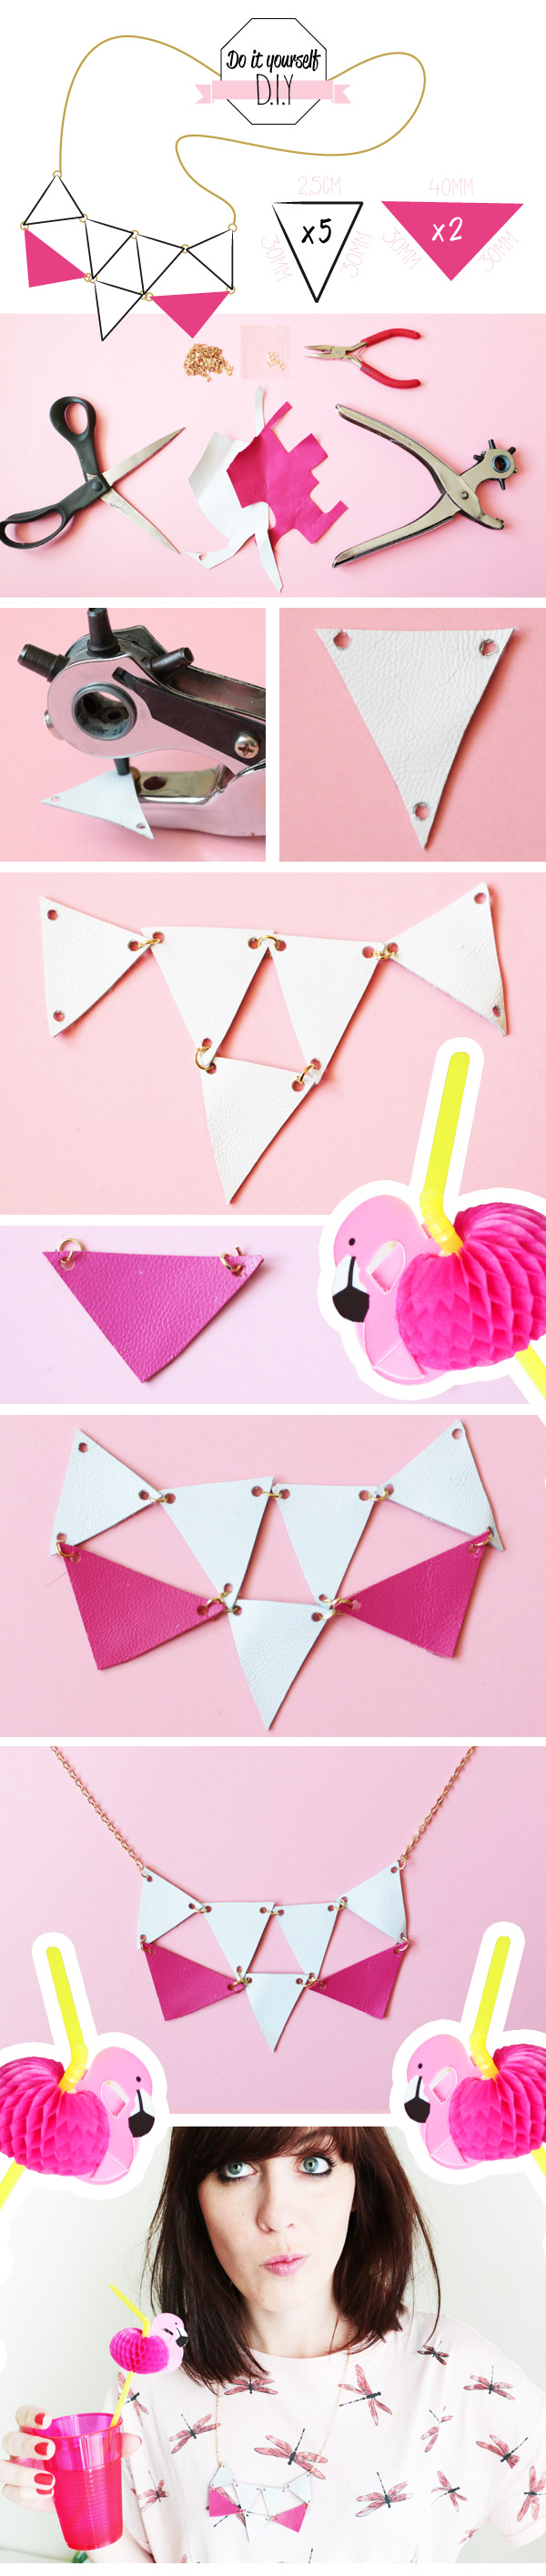 diy-collier-triangle_02